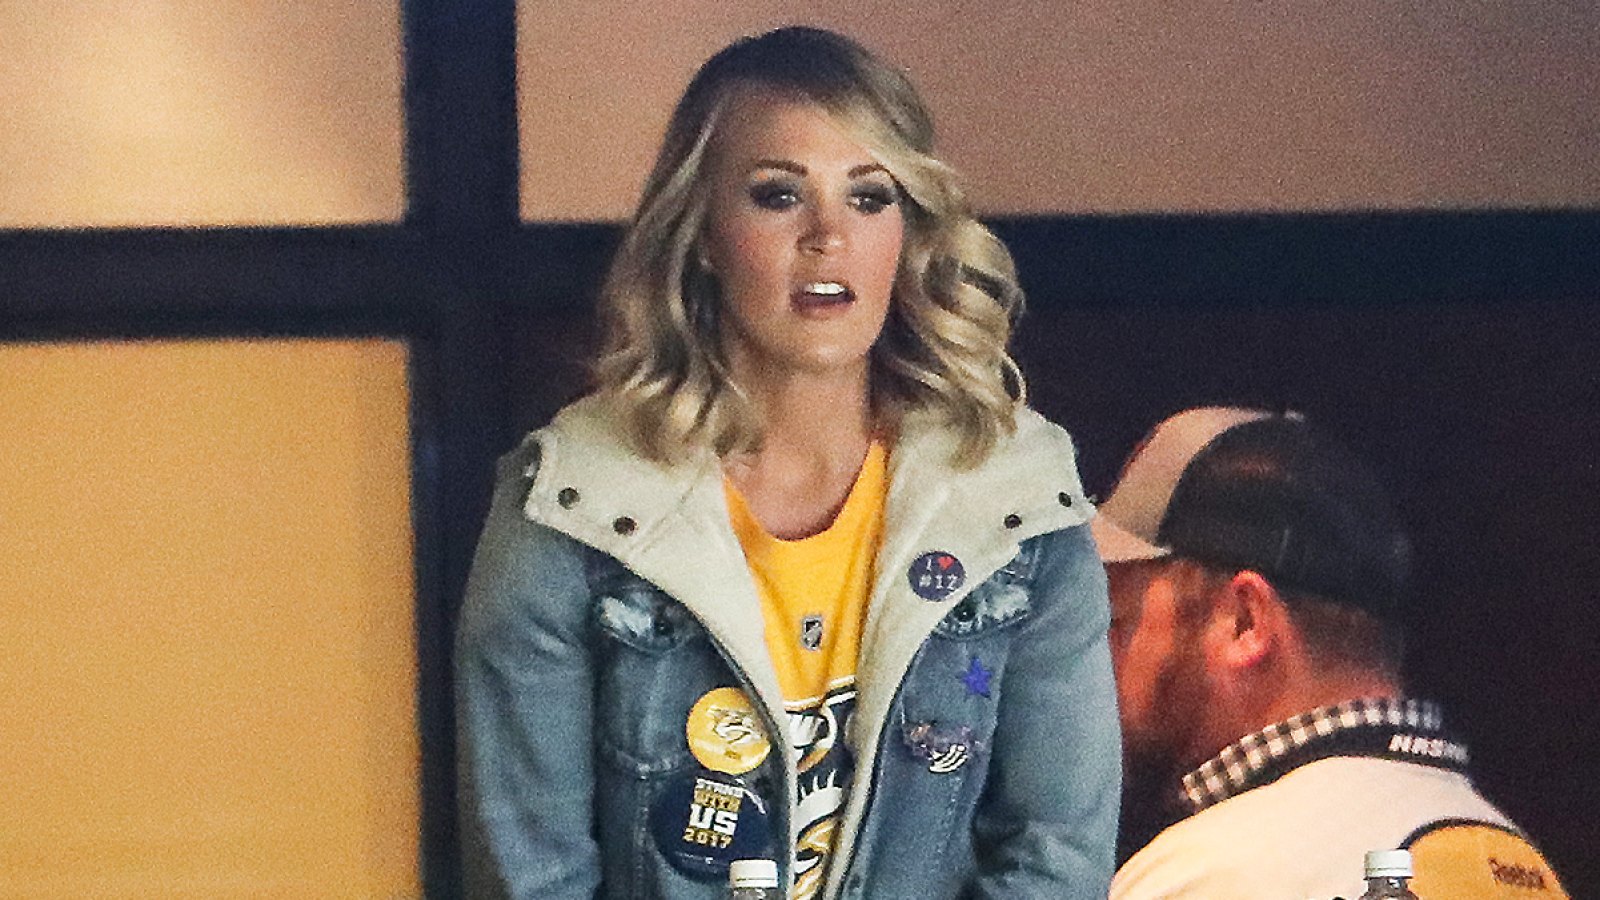 Carrie Underwood Calls Out NHL Over Goalie Interference at Predators Game